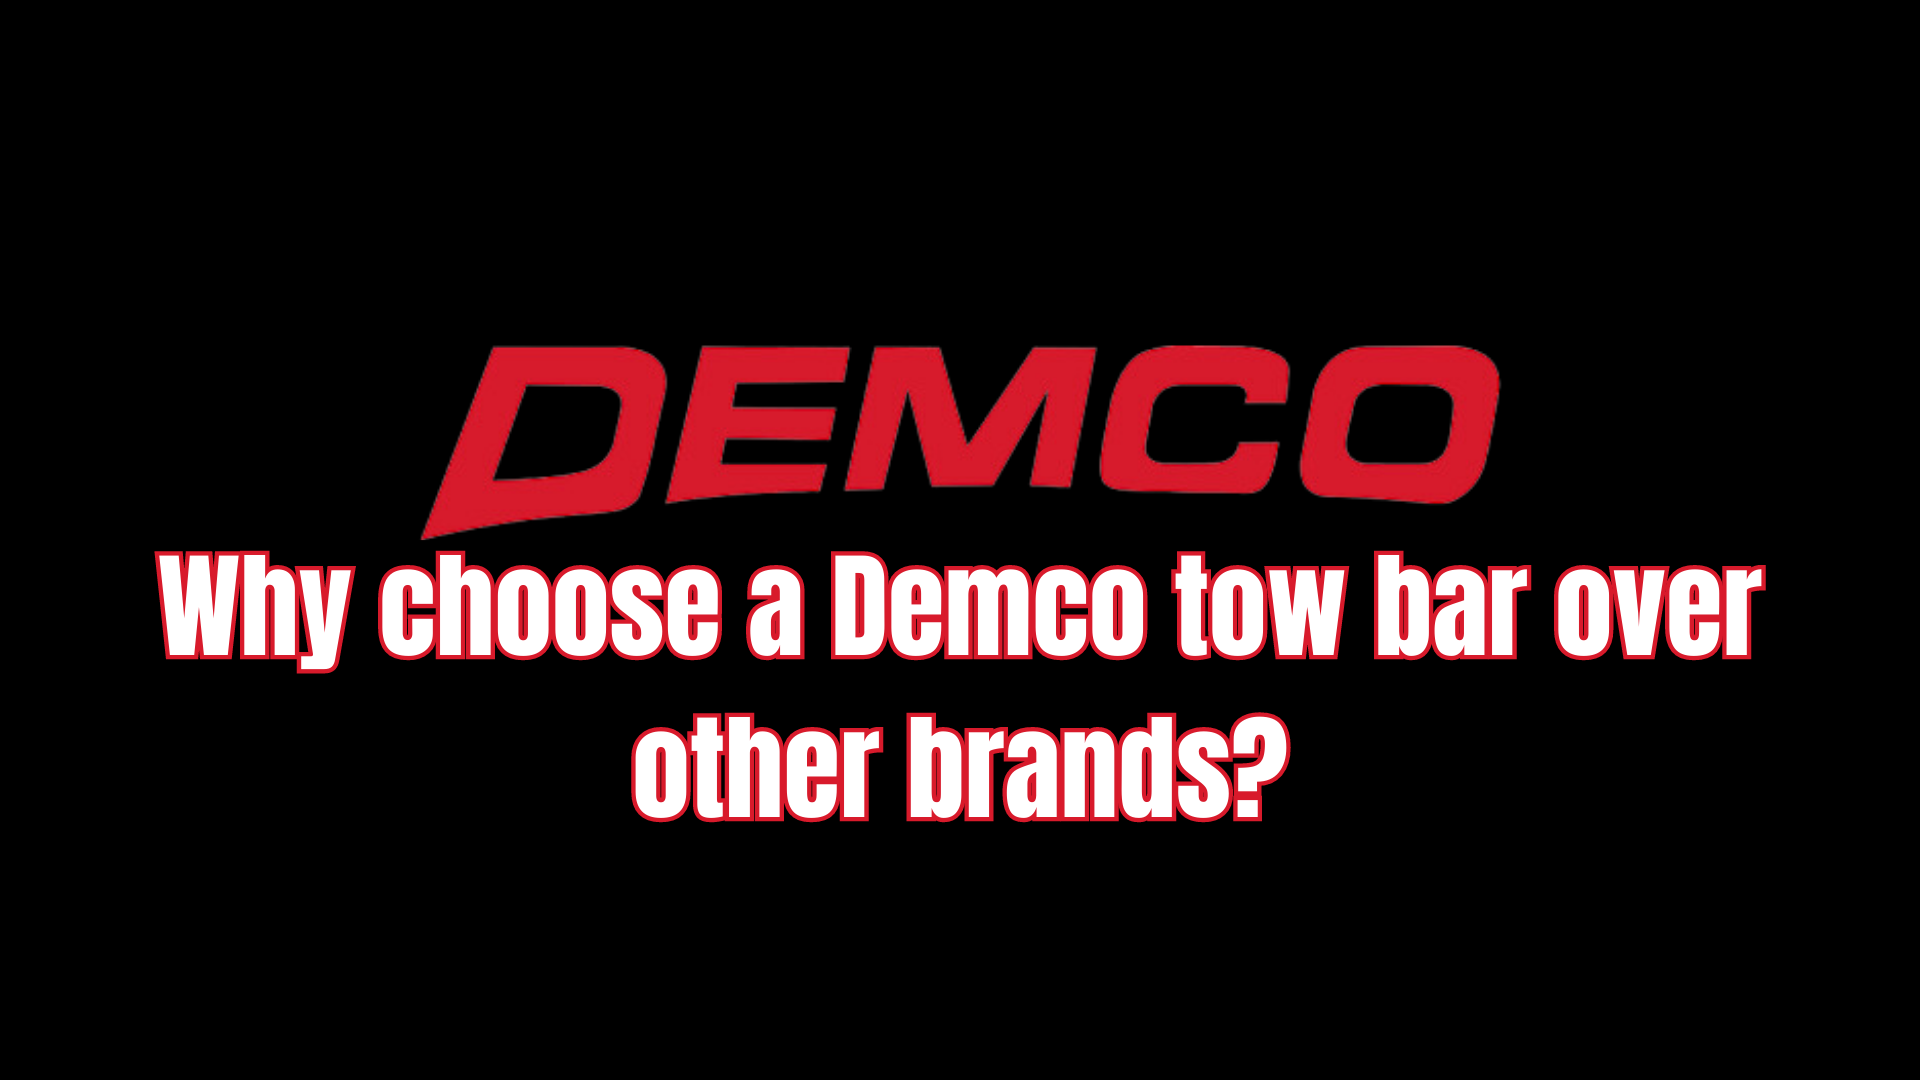 Why choose a Demco tow bar over other brands?